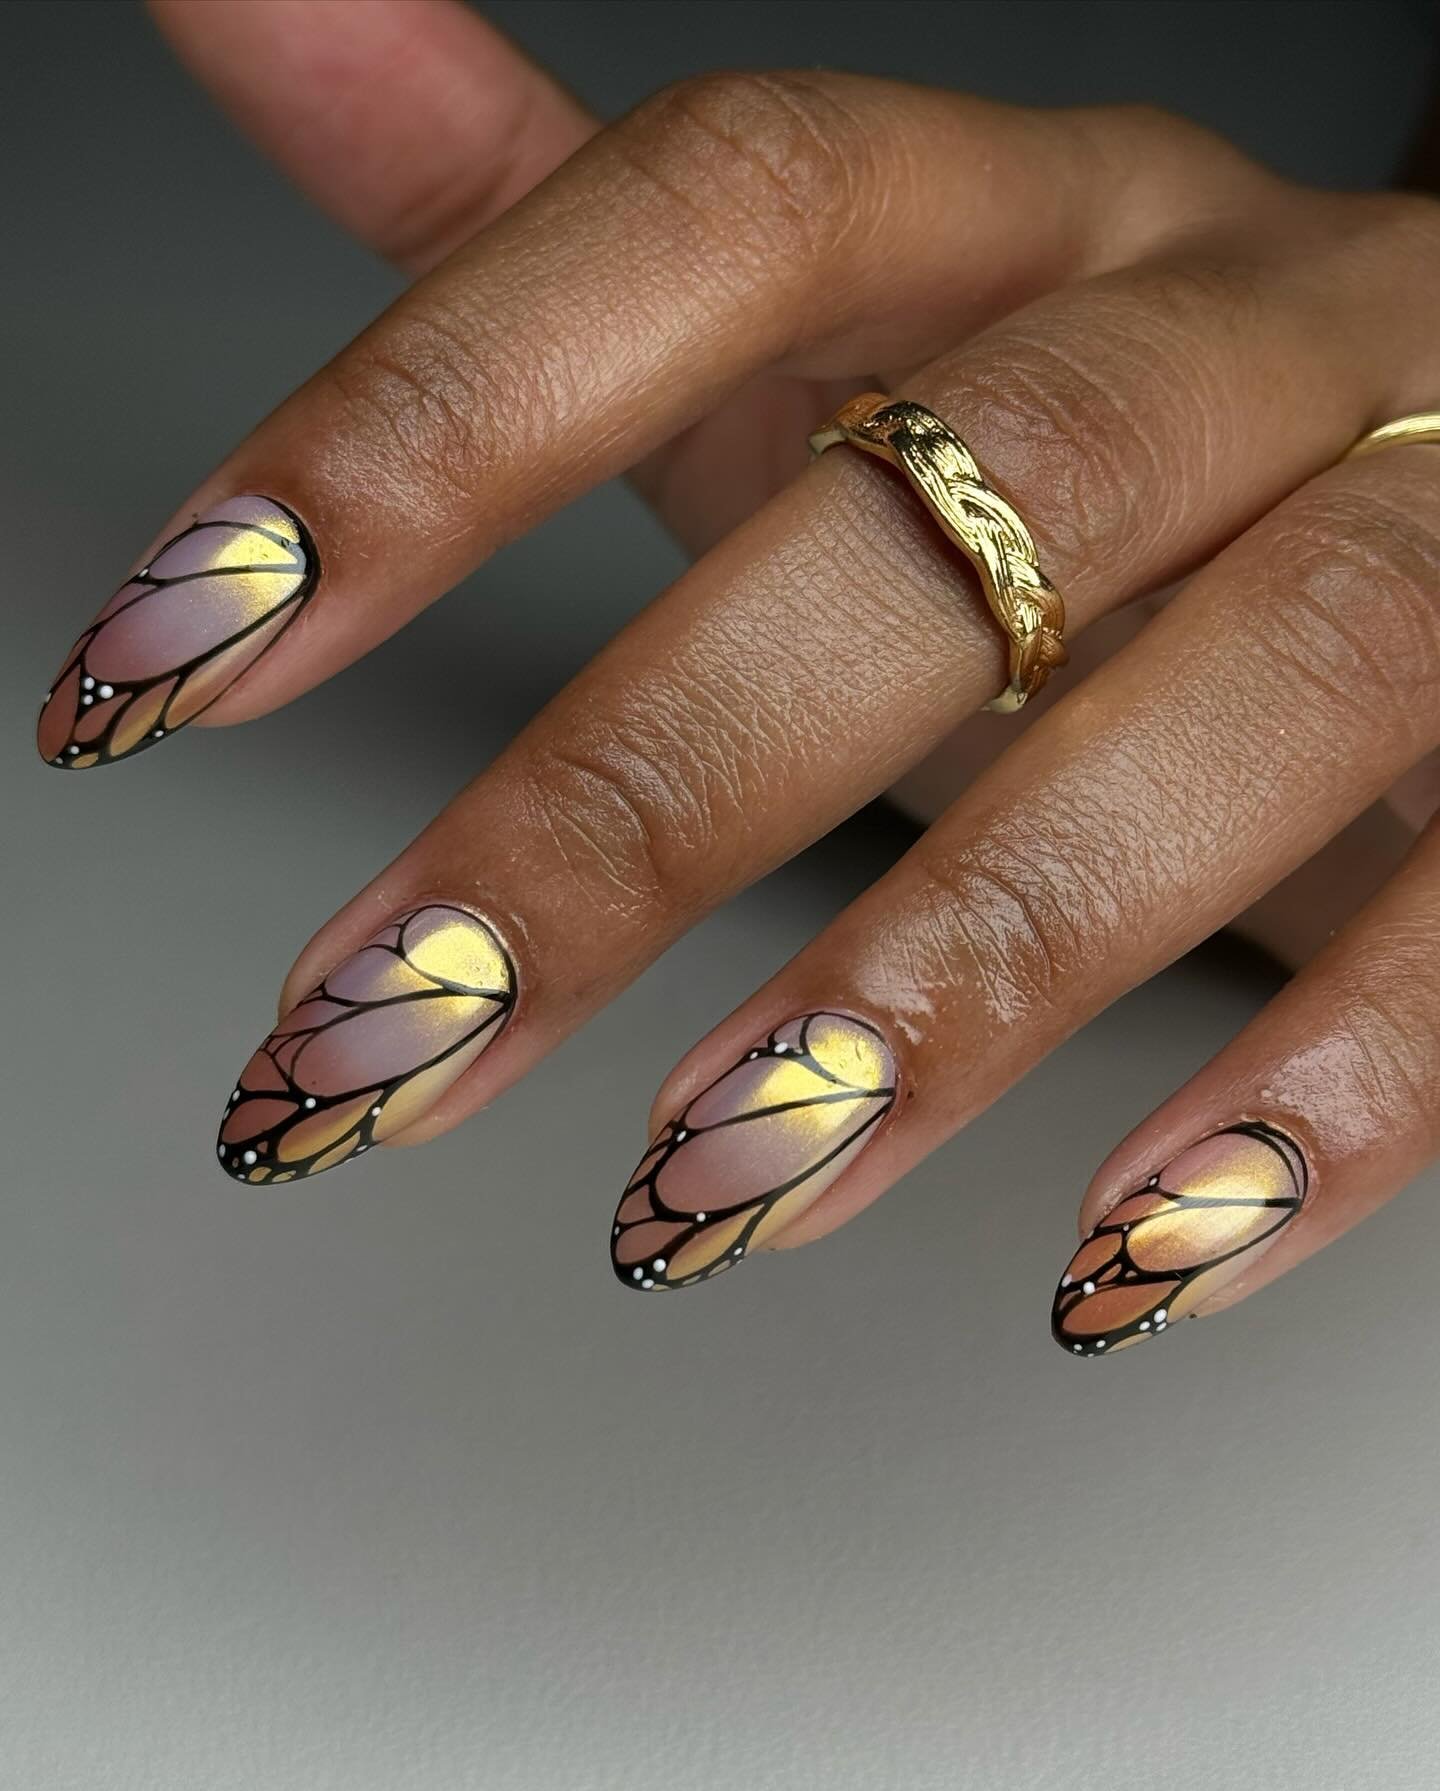 6 - Picture of Chrome Nails